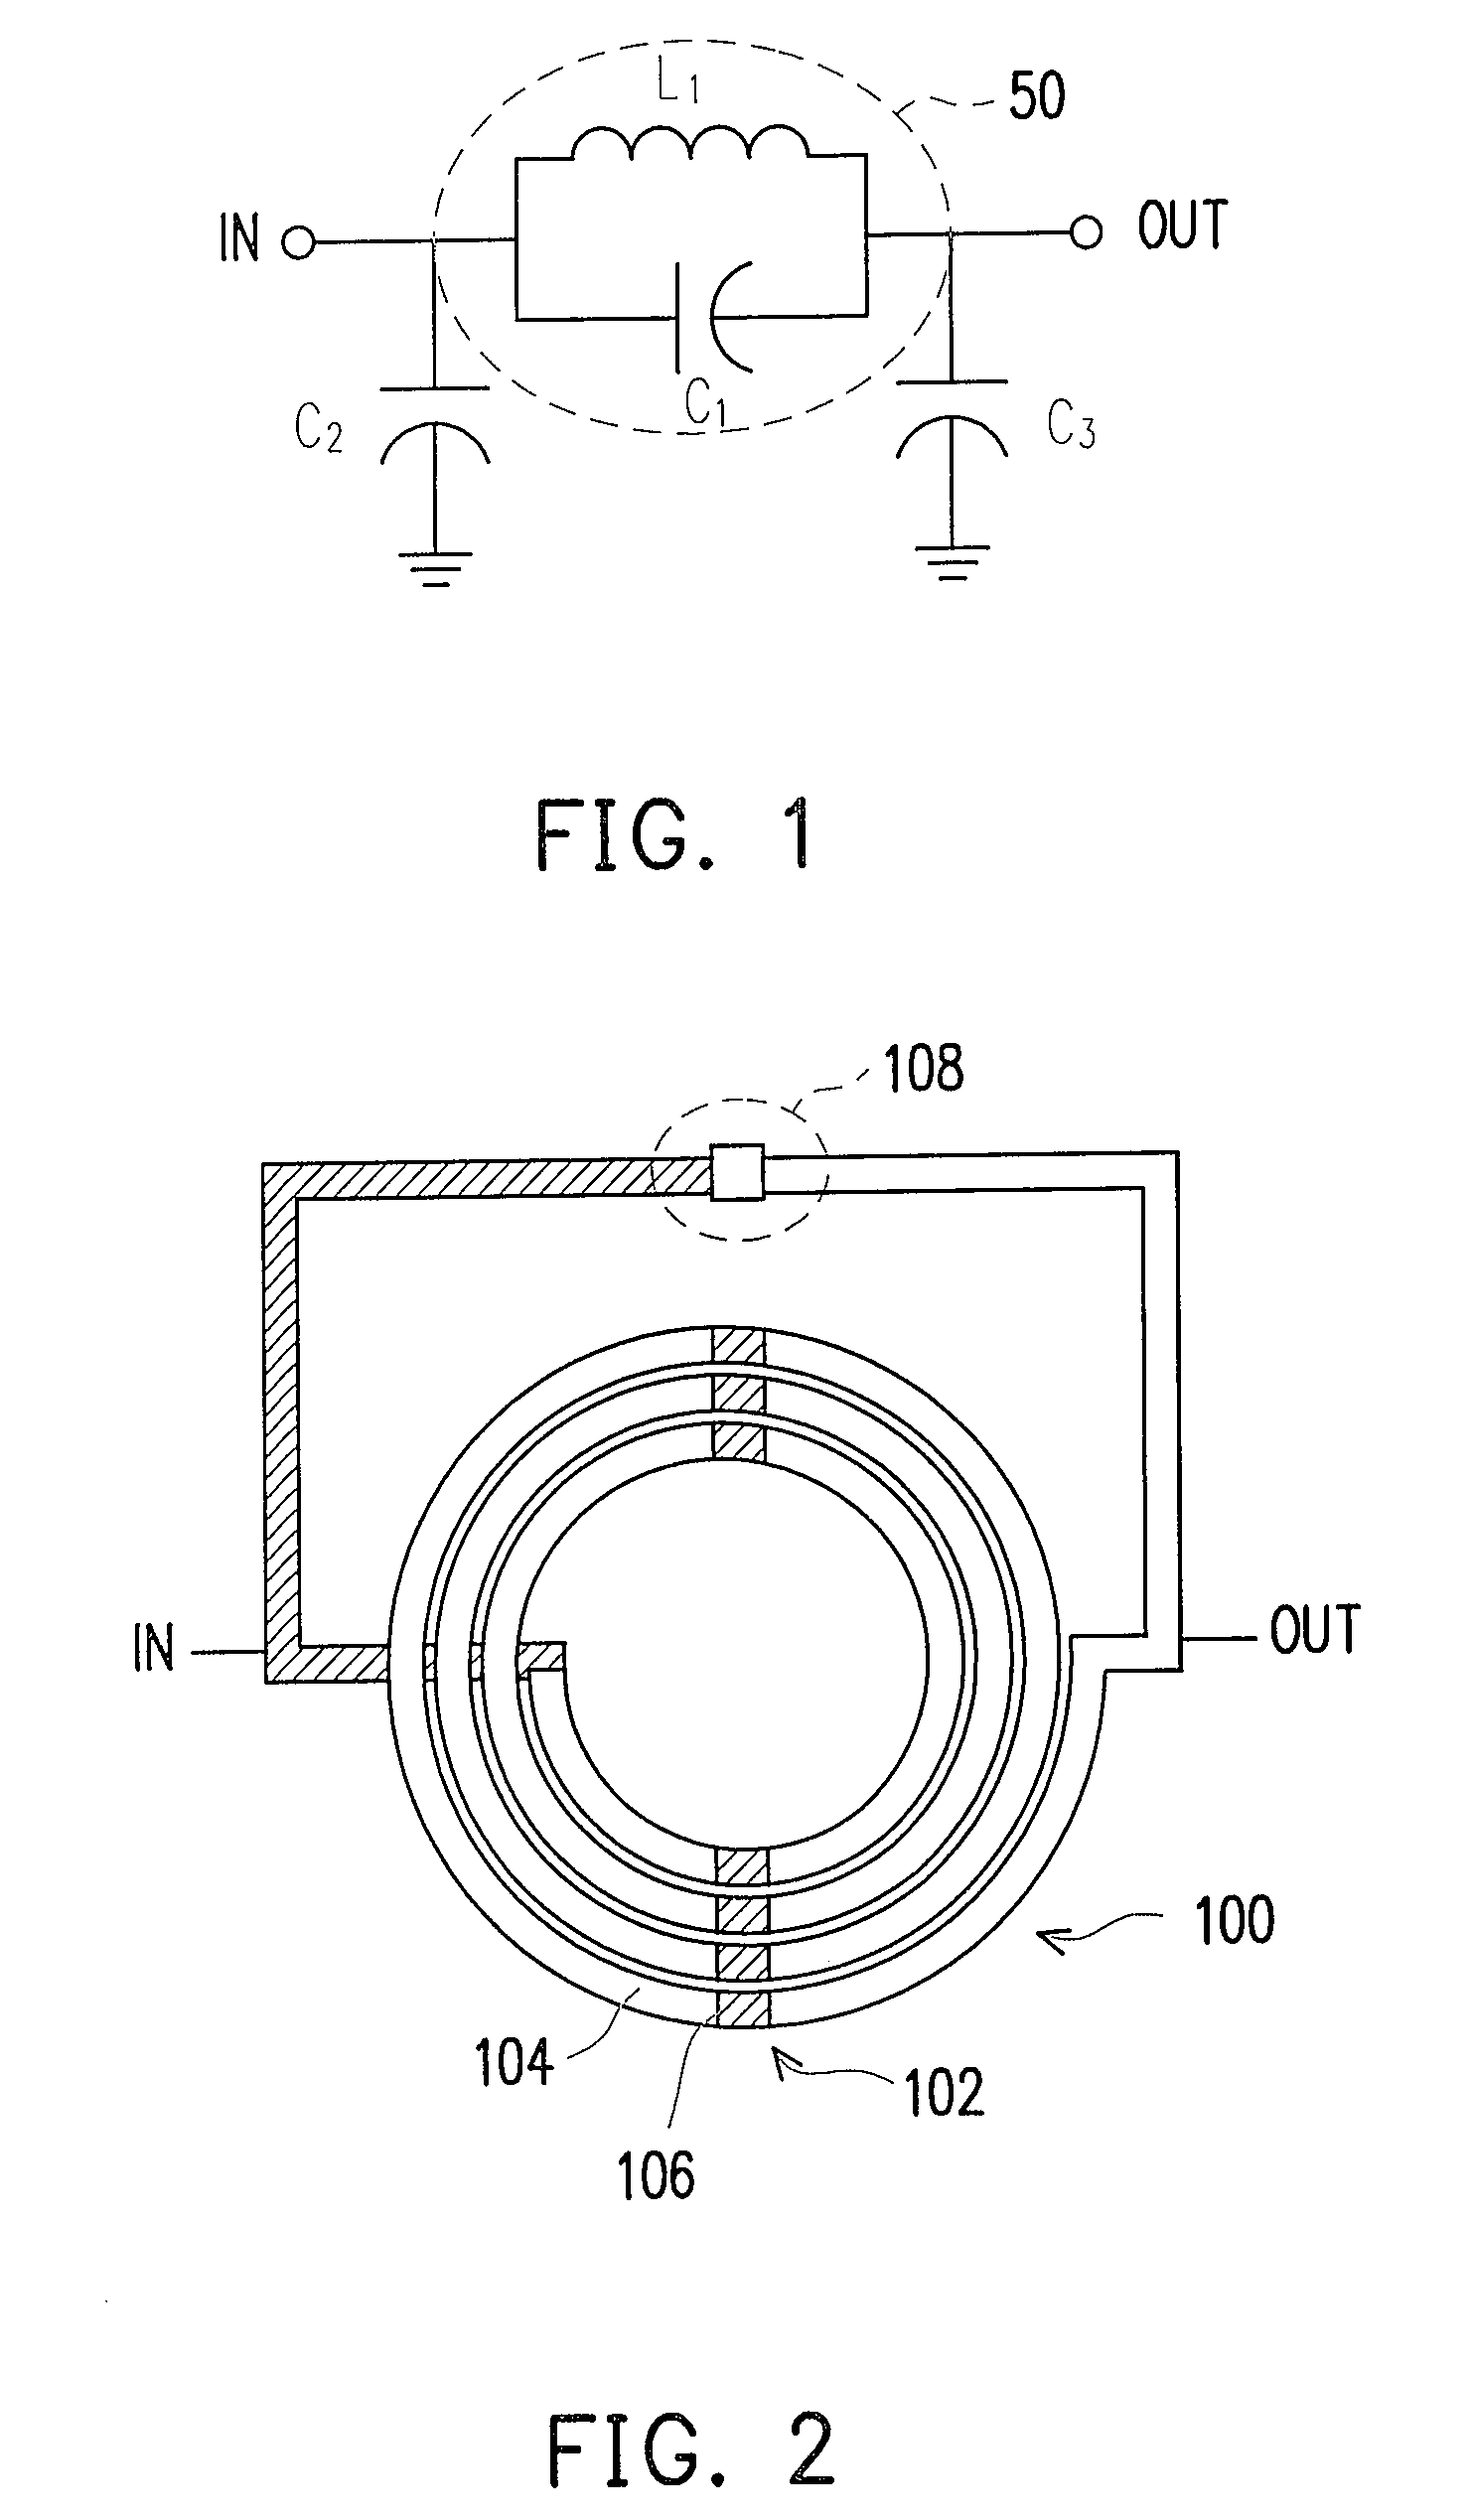 Circuit device having inductor and capacitor in parallel connection